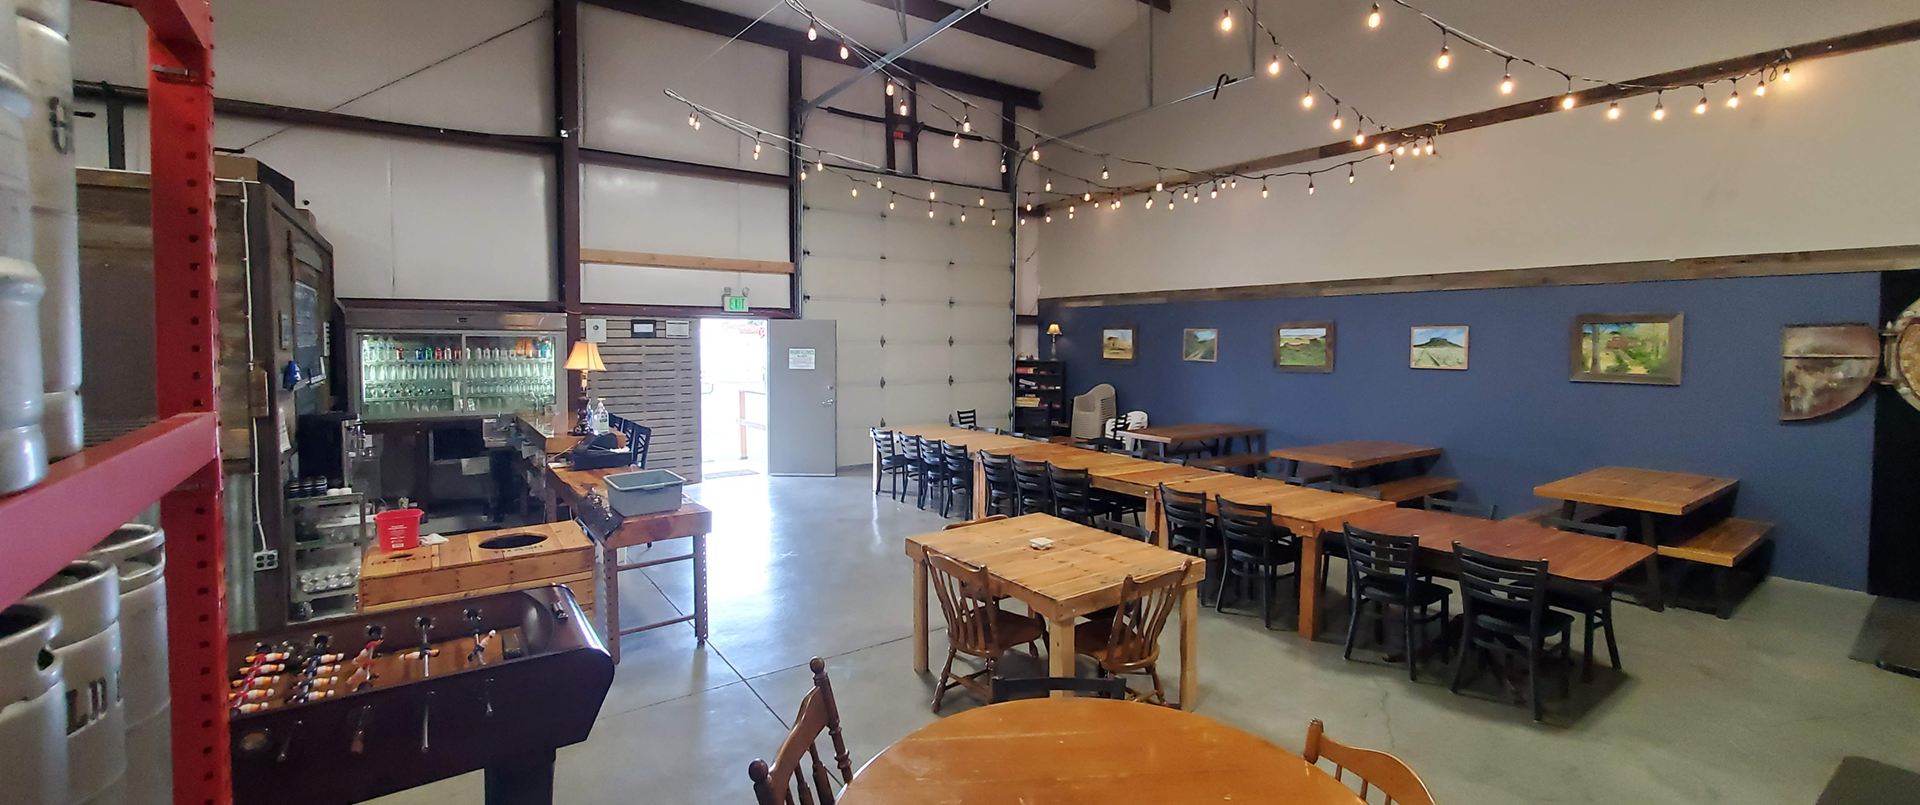 The tasting room is located in an industrial metal building wtih concrete floors. It is decorated with blue walls with landscape paintings. Cafe lights are strung over wooden tables.